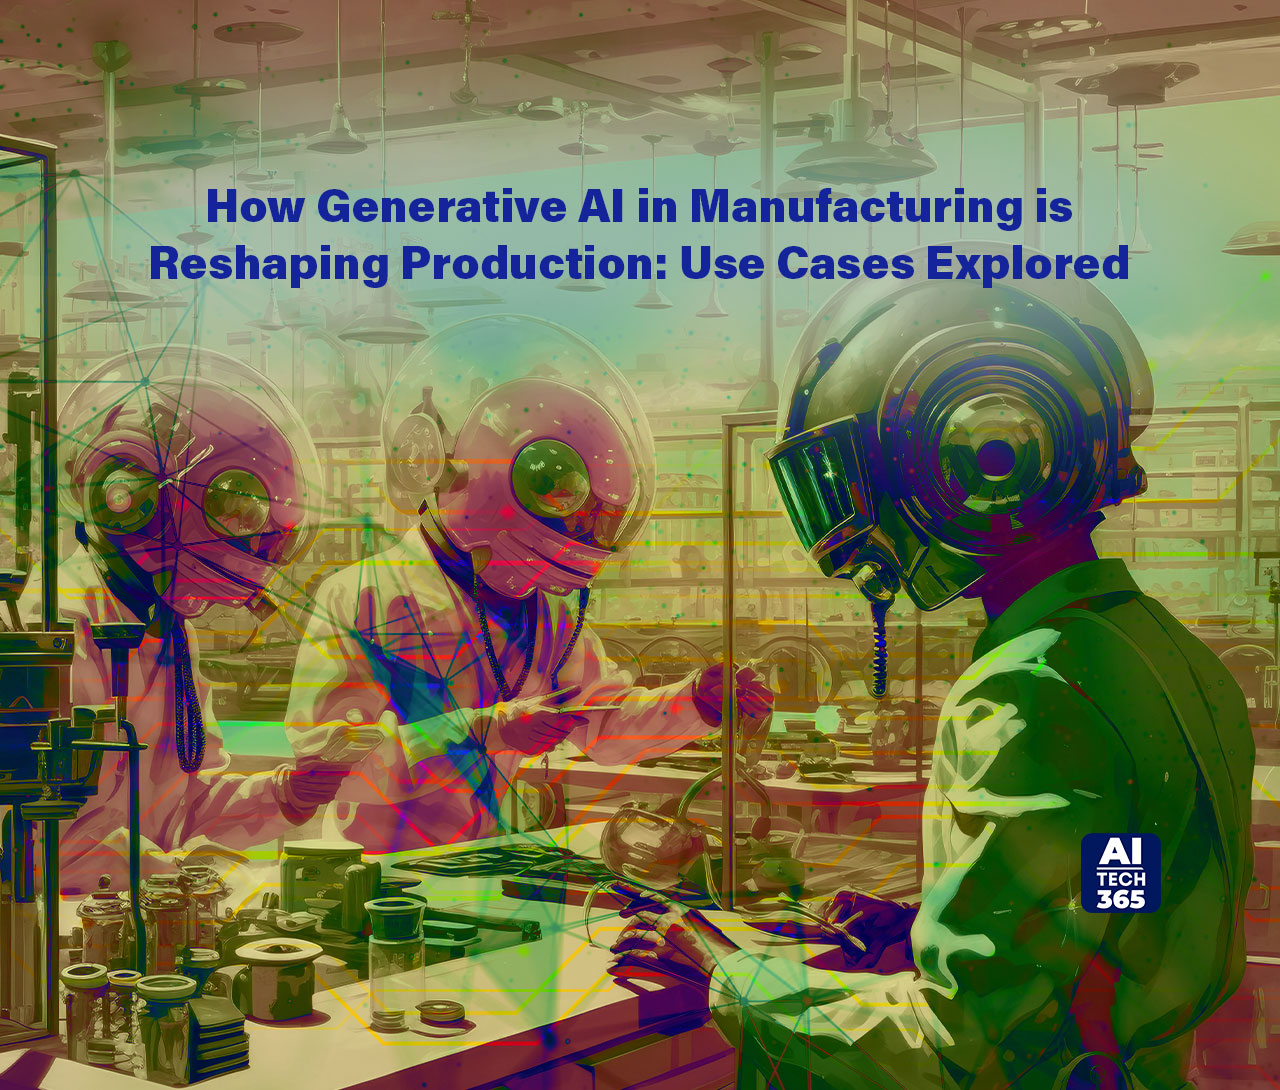 How Generative AI in Manufacturing is Reshaping Production: Use Cases Explored